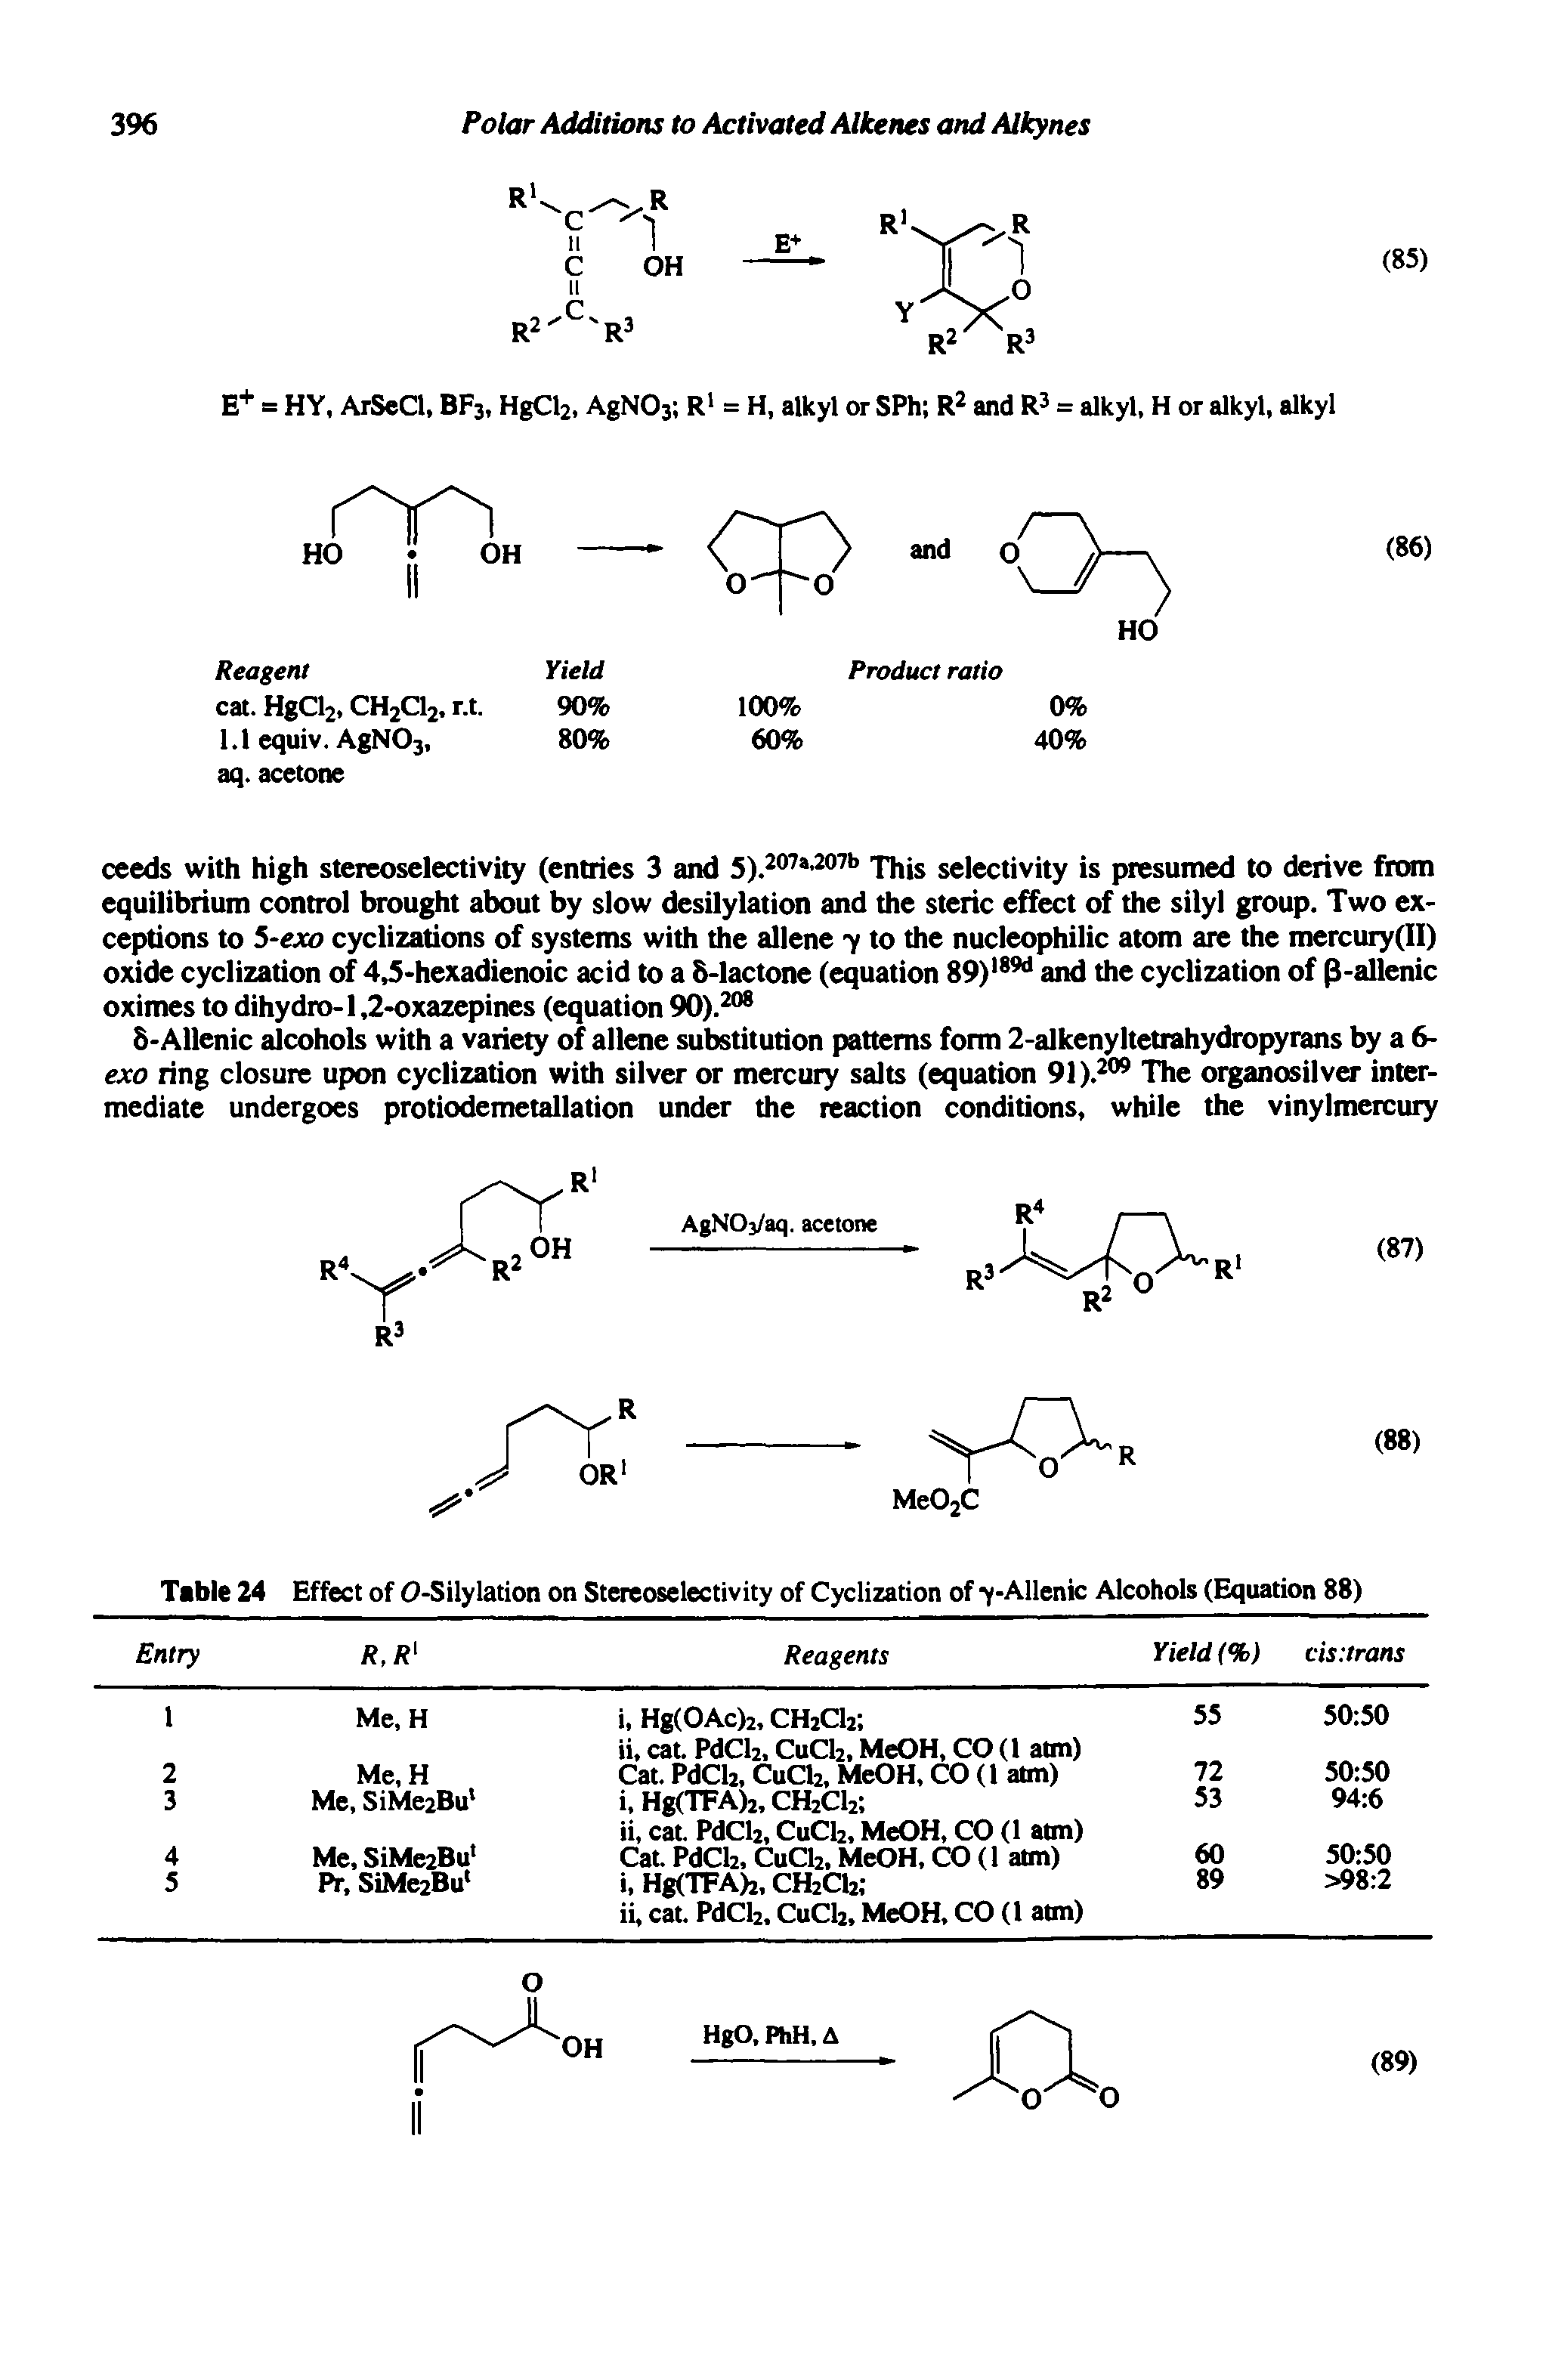 Table 24 Effect of O-Silylation on Stereoselectivity of Cyclization of y-Allenic Alcohols (Equation 88)...